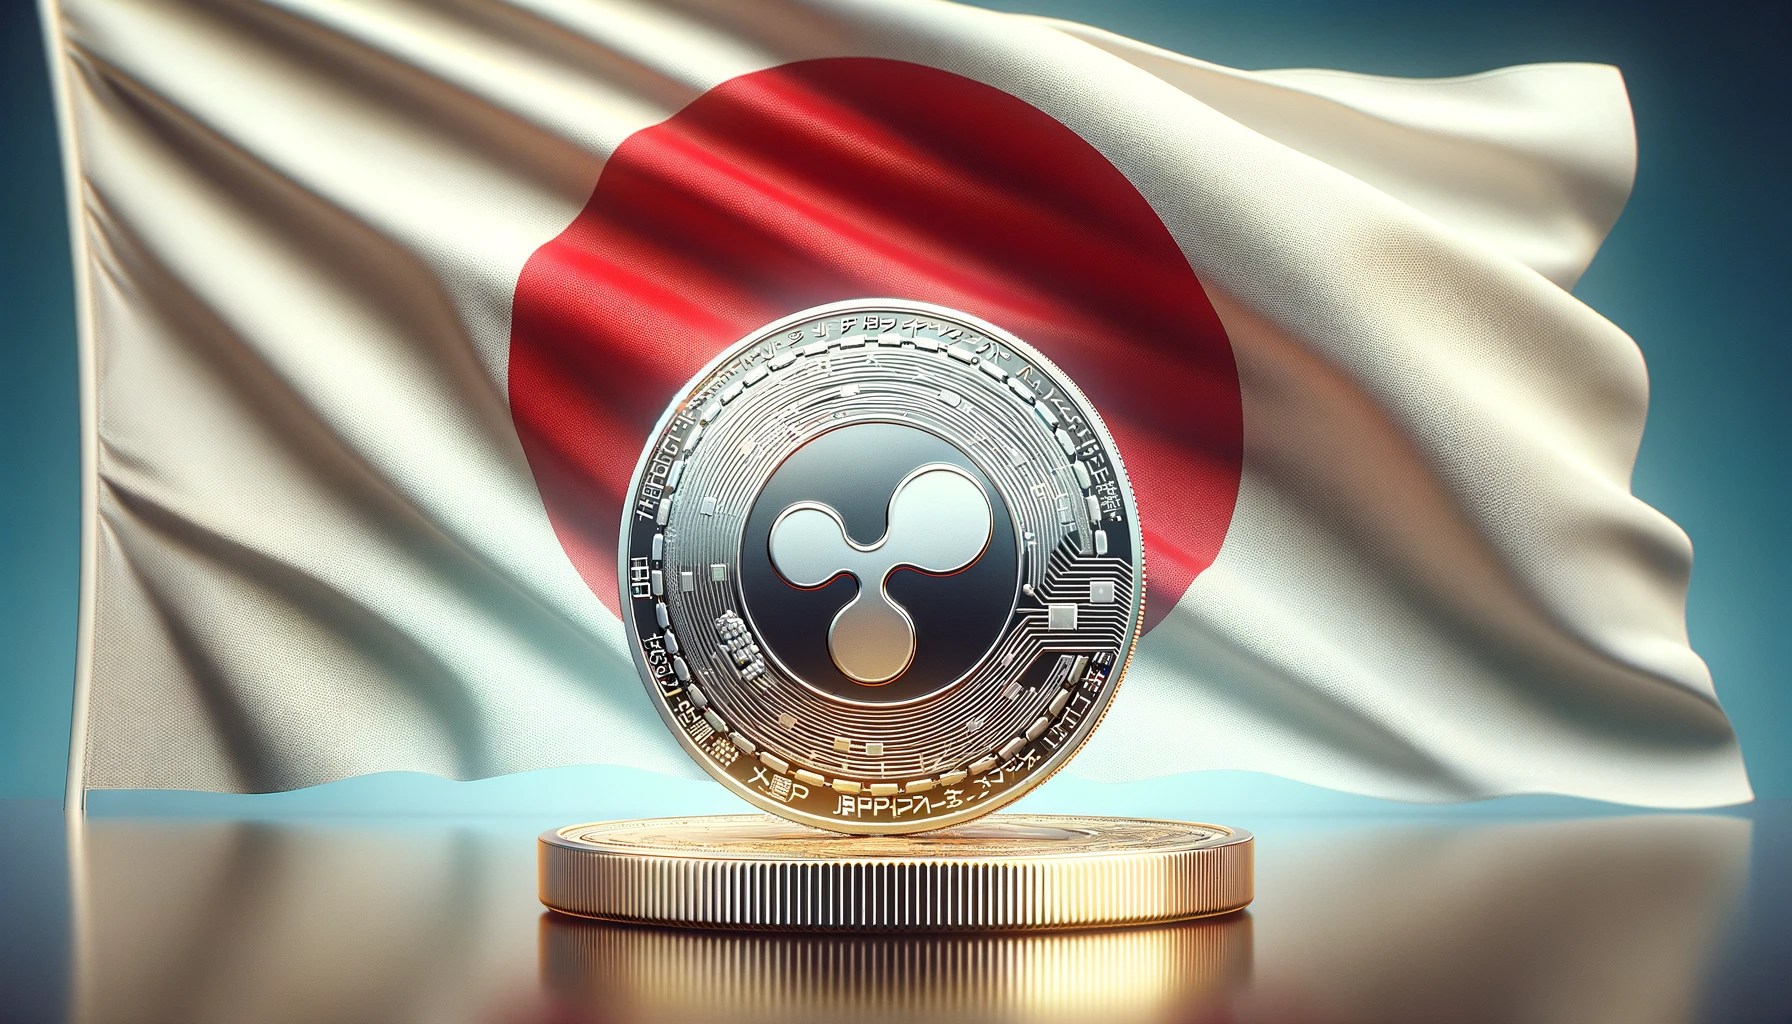 XRP Ledger Validator Launched By Japanese Financial Titan: Details